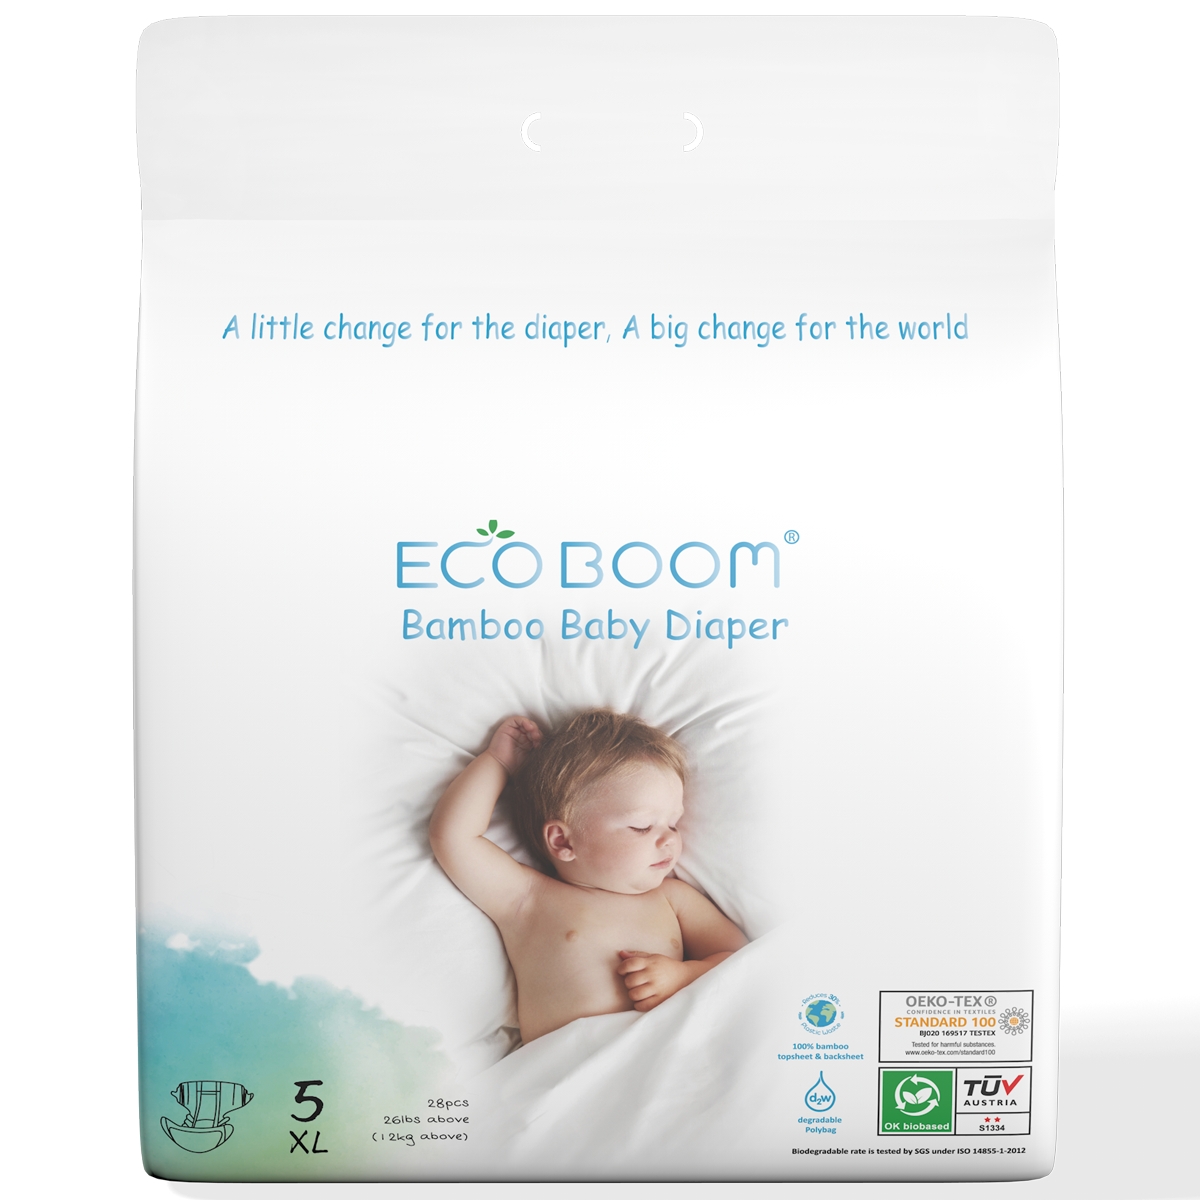 XL Tape Bamboo Eco Boom Eco Friendly Biodegradable Disposable Diapers Trial Pack for Babies 26 pounds up, 28 pcs